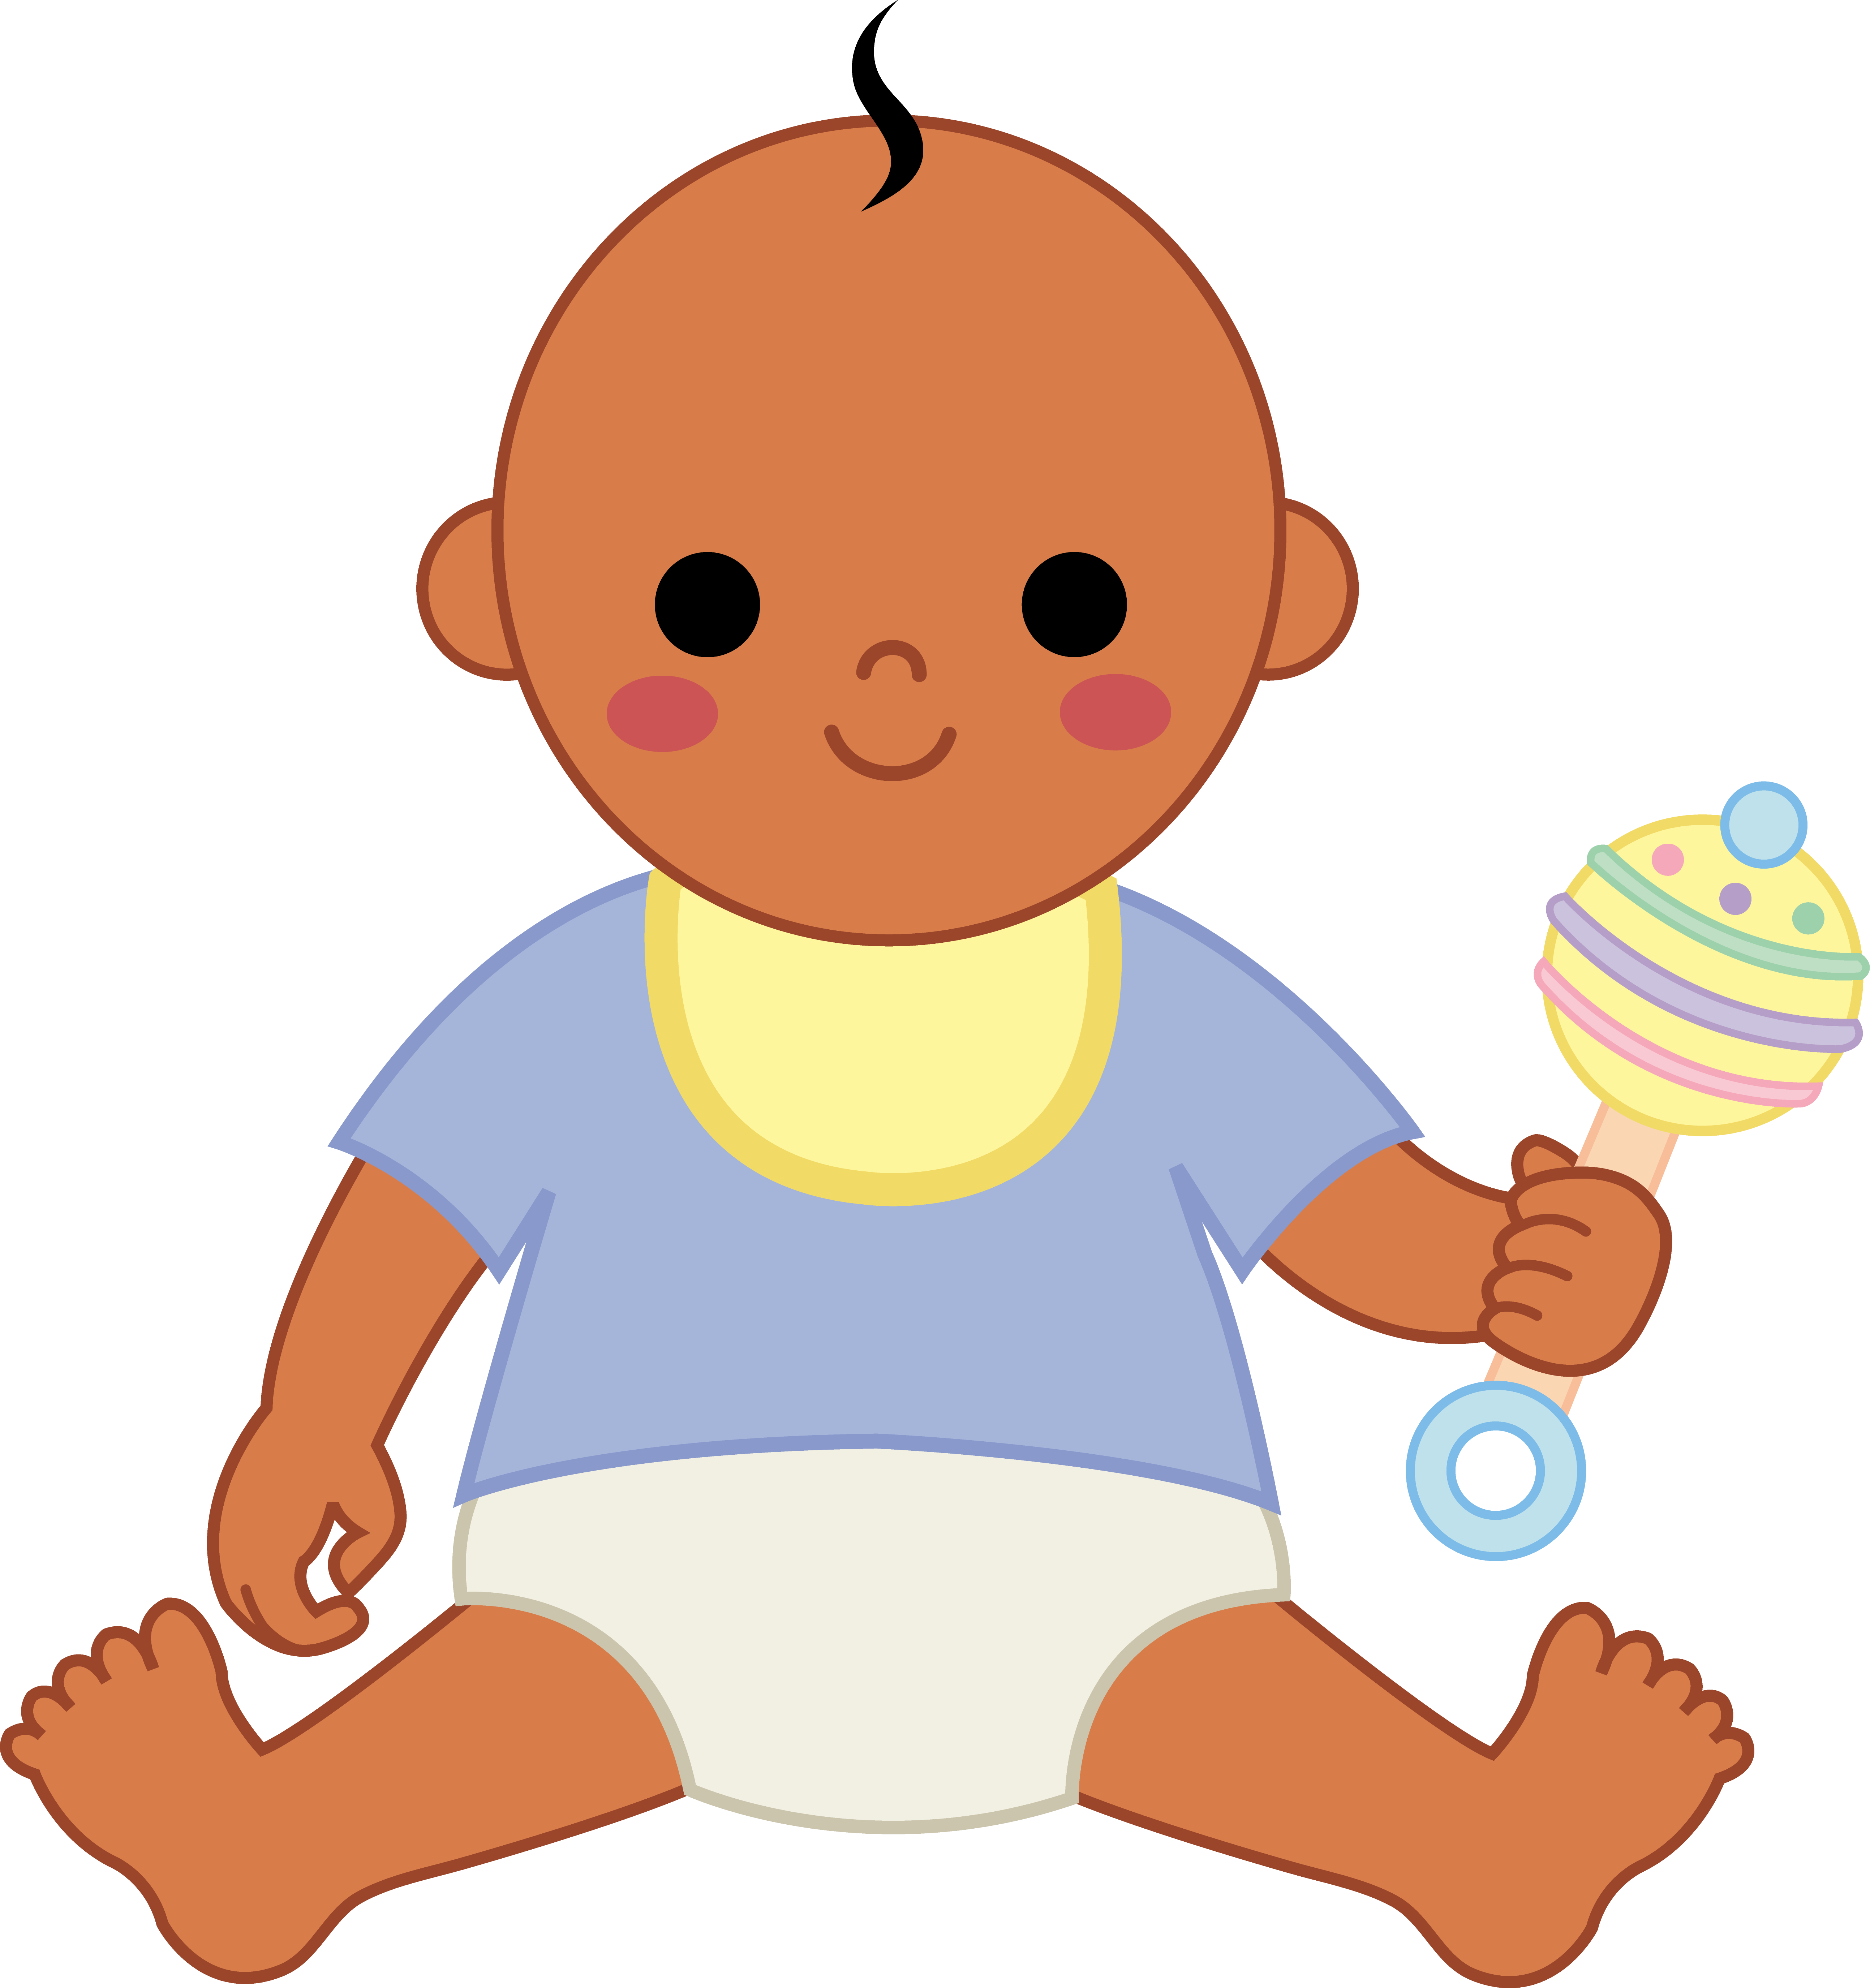 clipart baby - Baby Images Clip Art